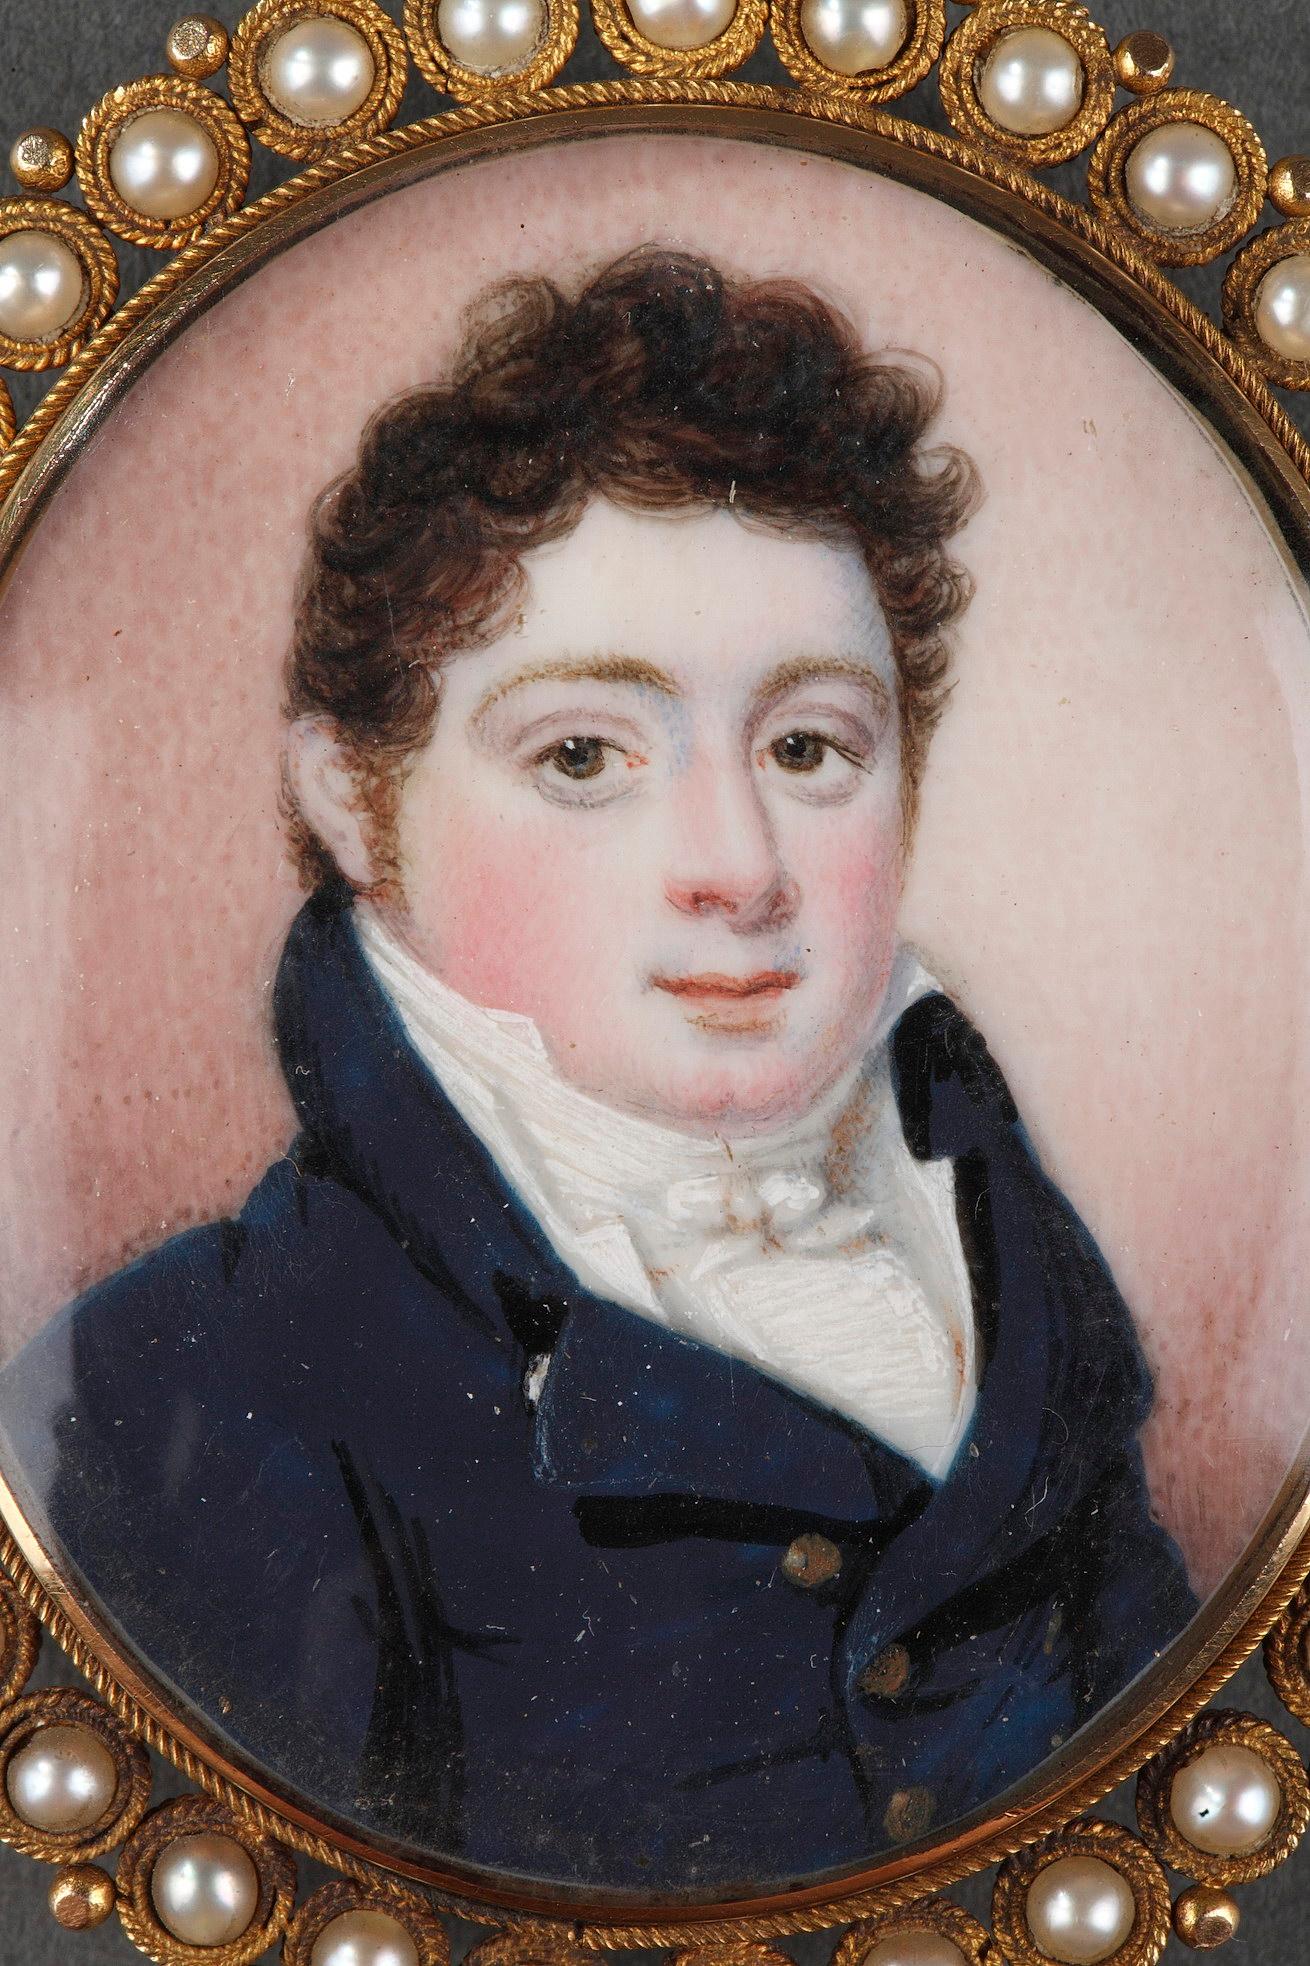 A gold-mounted pendant with a mother-of-pearl medallion depicting the portrait of a young dandy on light pink background, framed with pearls. On the back, locks of hair attached with fine pearls and monogram 